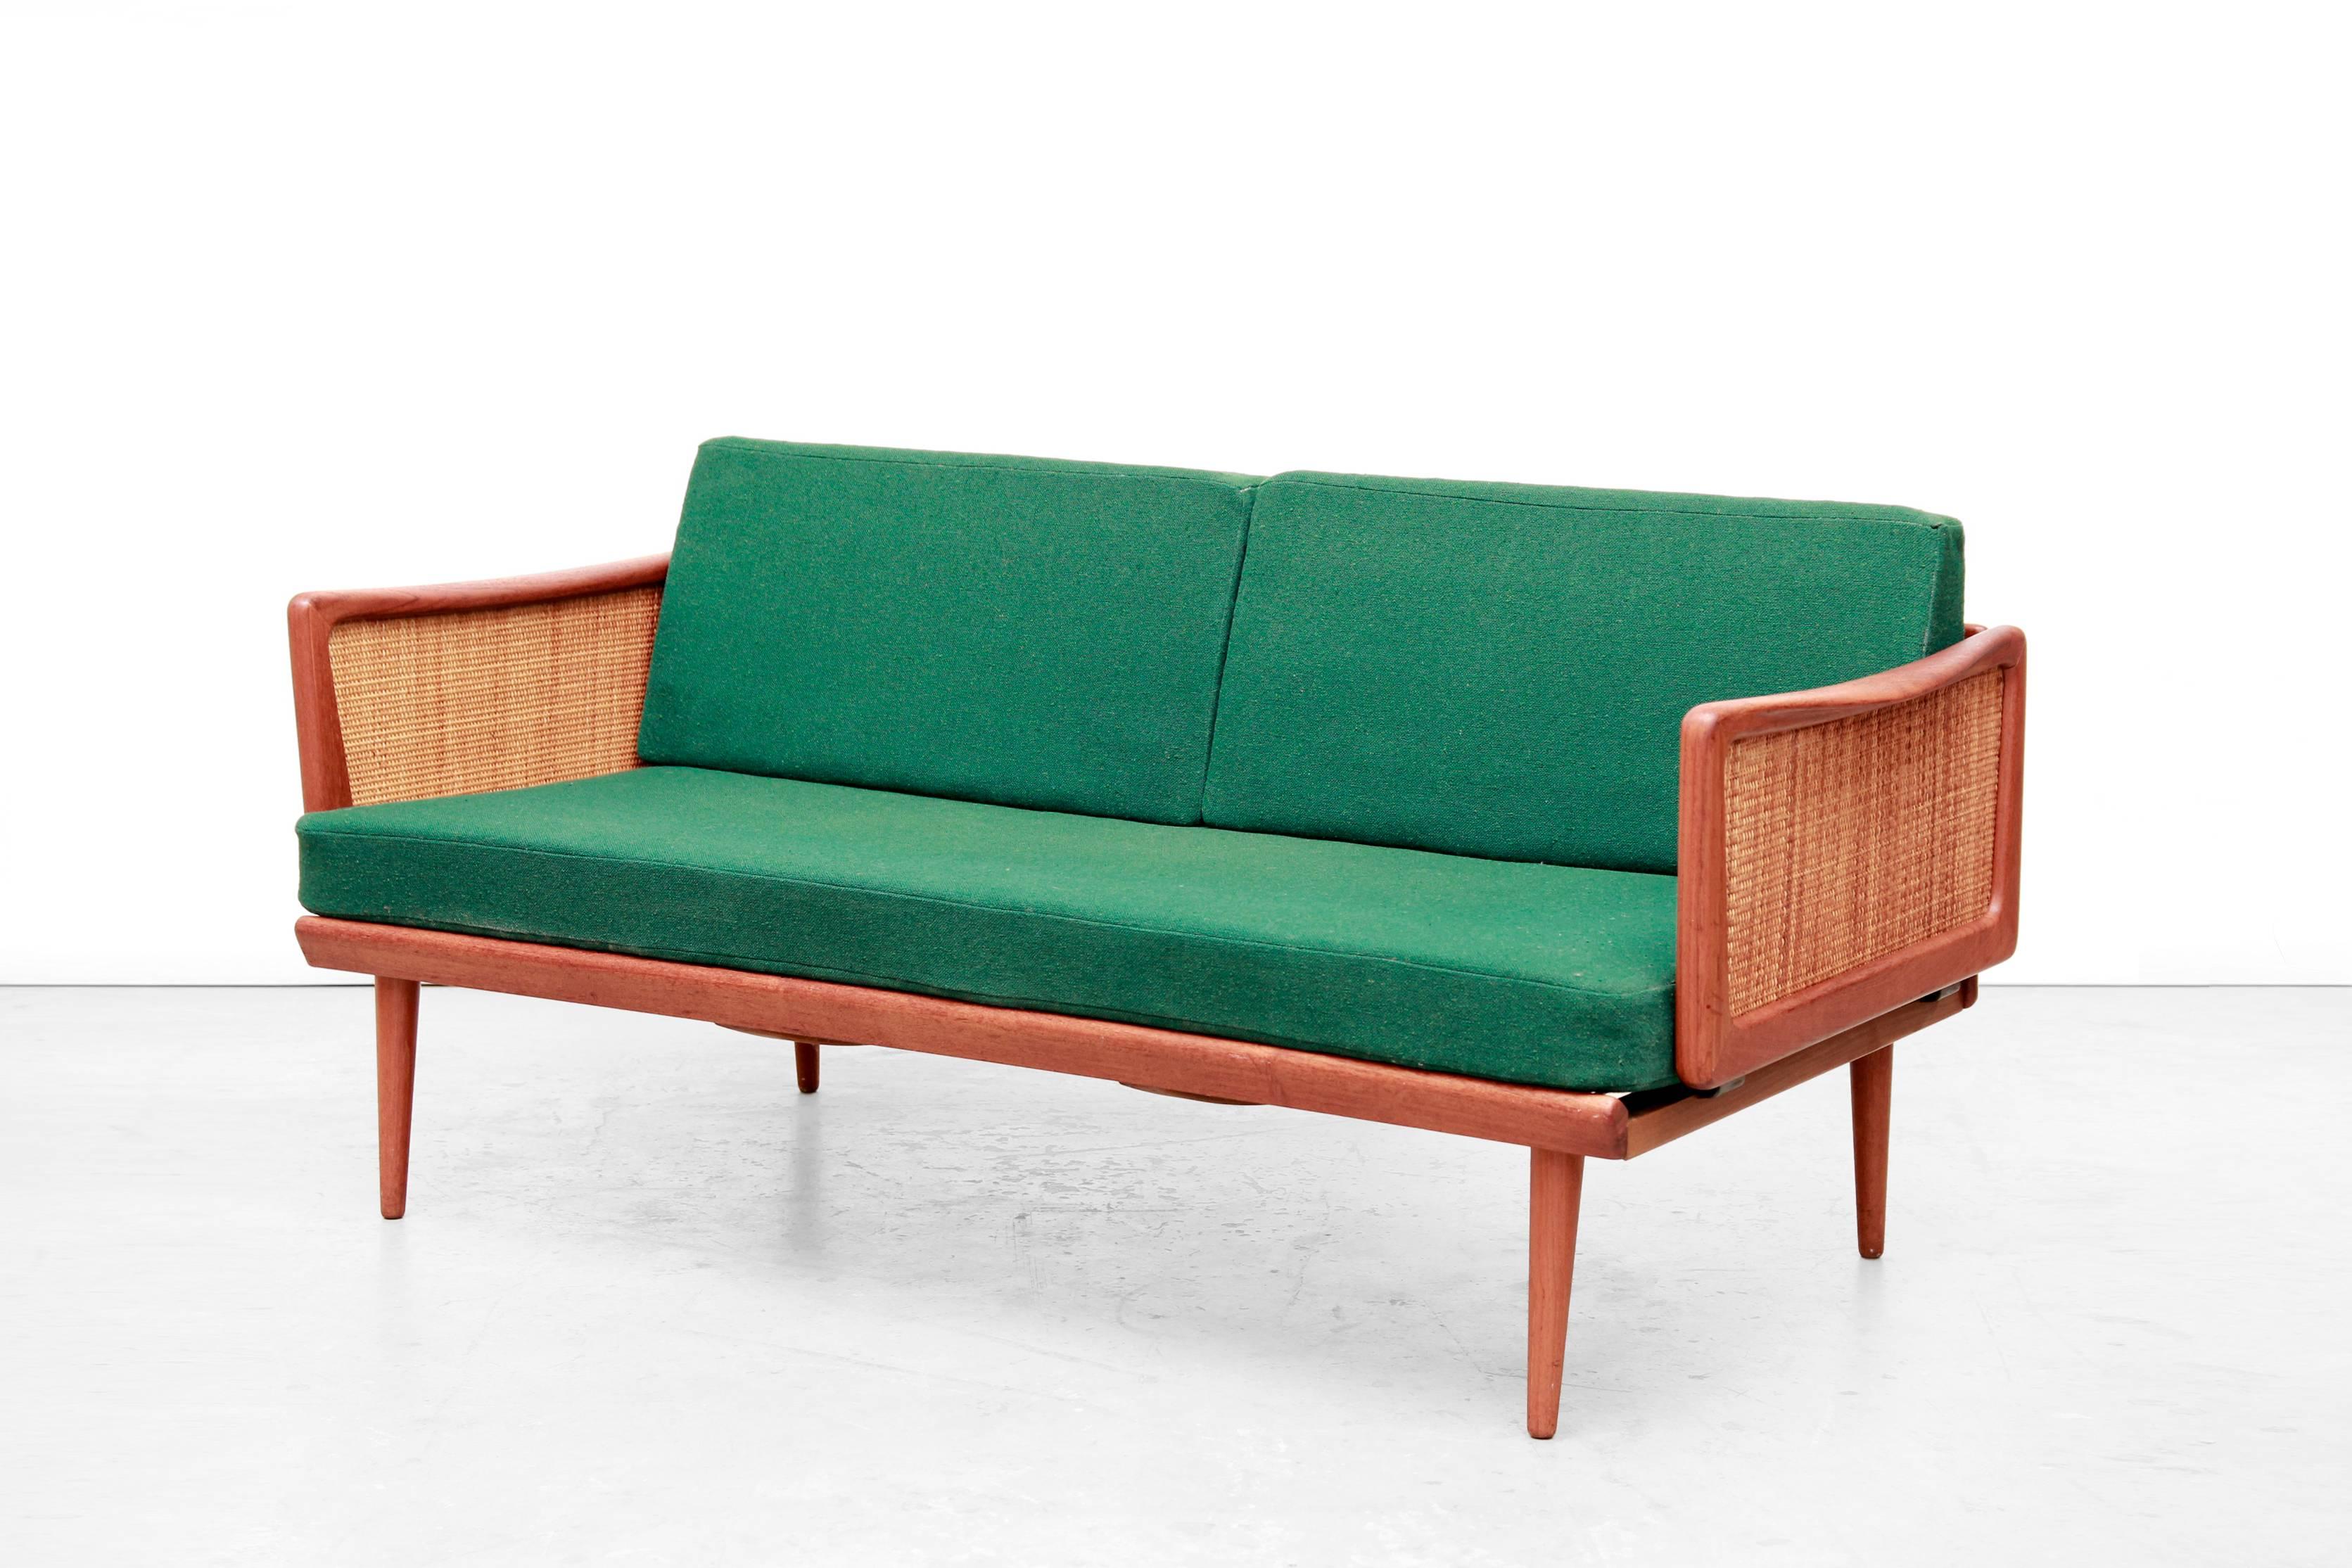 Particularly beautiful and rare sofa bed by Peter Hvidt & Orla Mølgaard Nielsen.
This daybed with modelnam FD 451 is produced by France & Daverkosen in Denmark. The frame is made of solid teak wood and is of very high quality, with woven cane